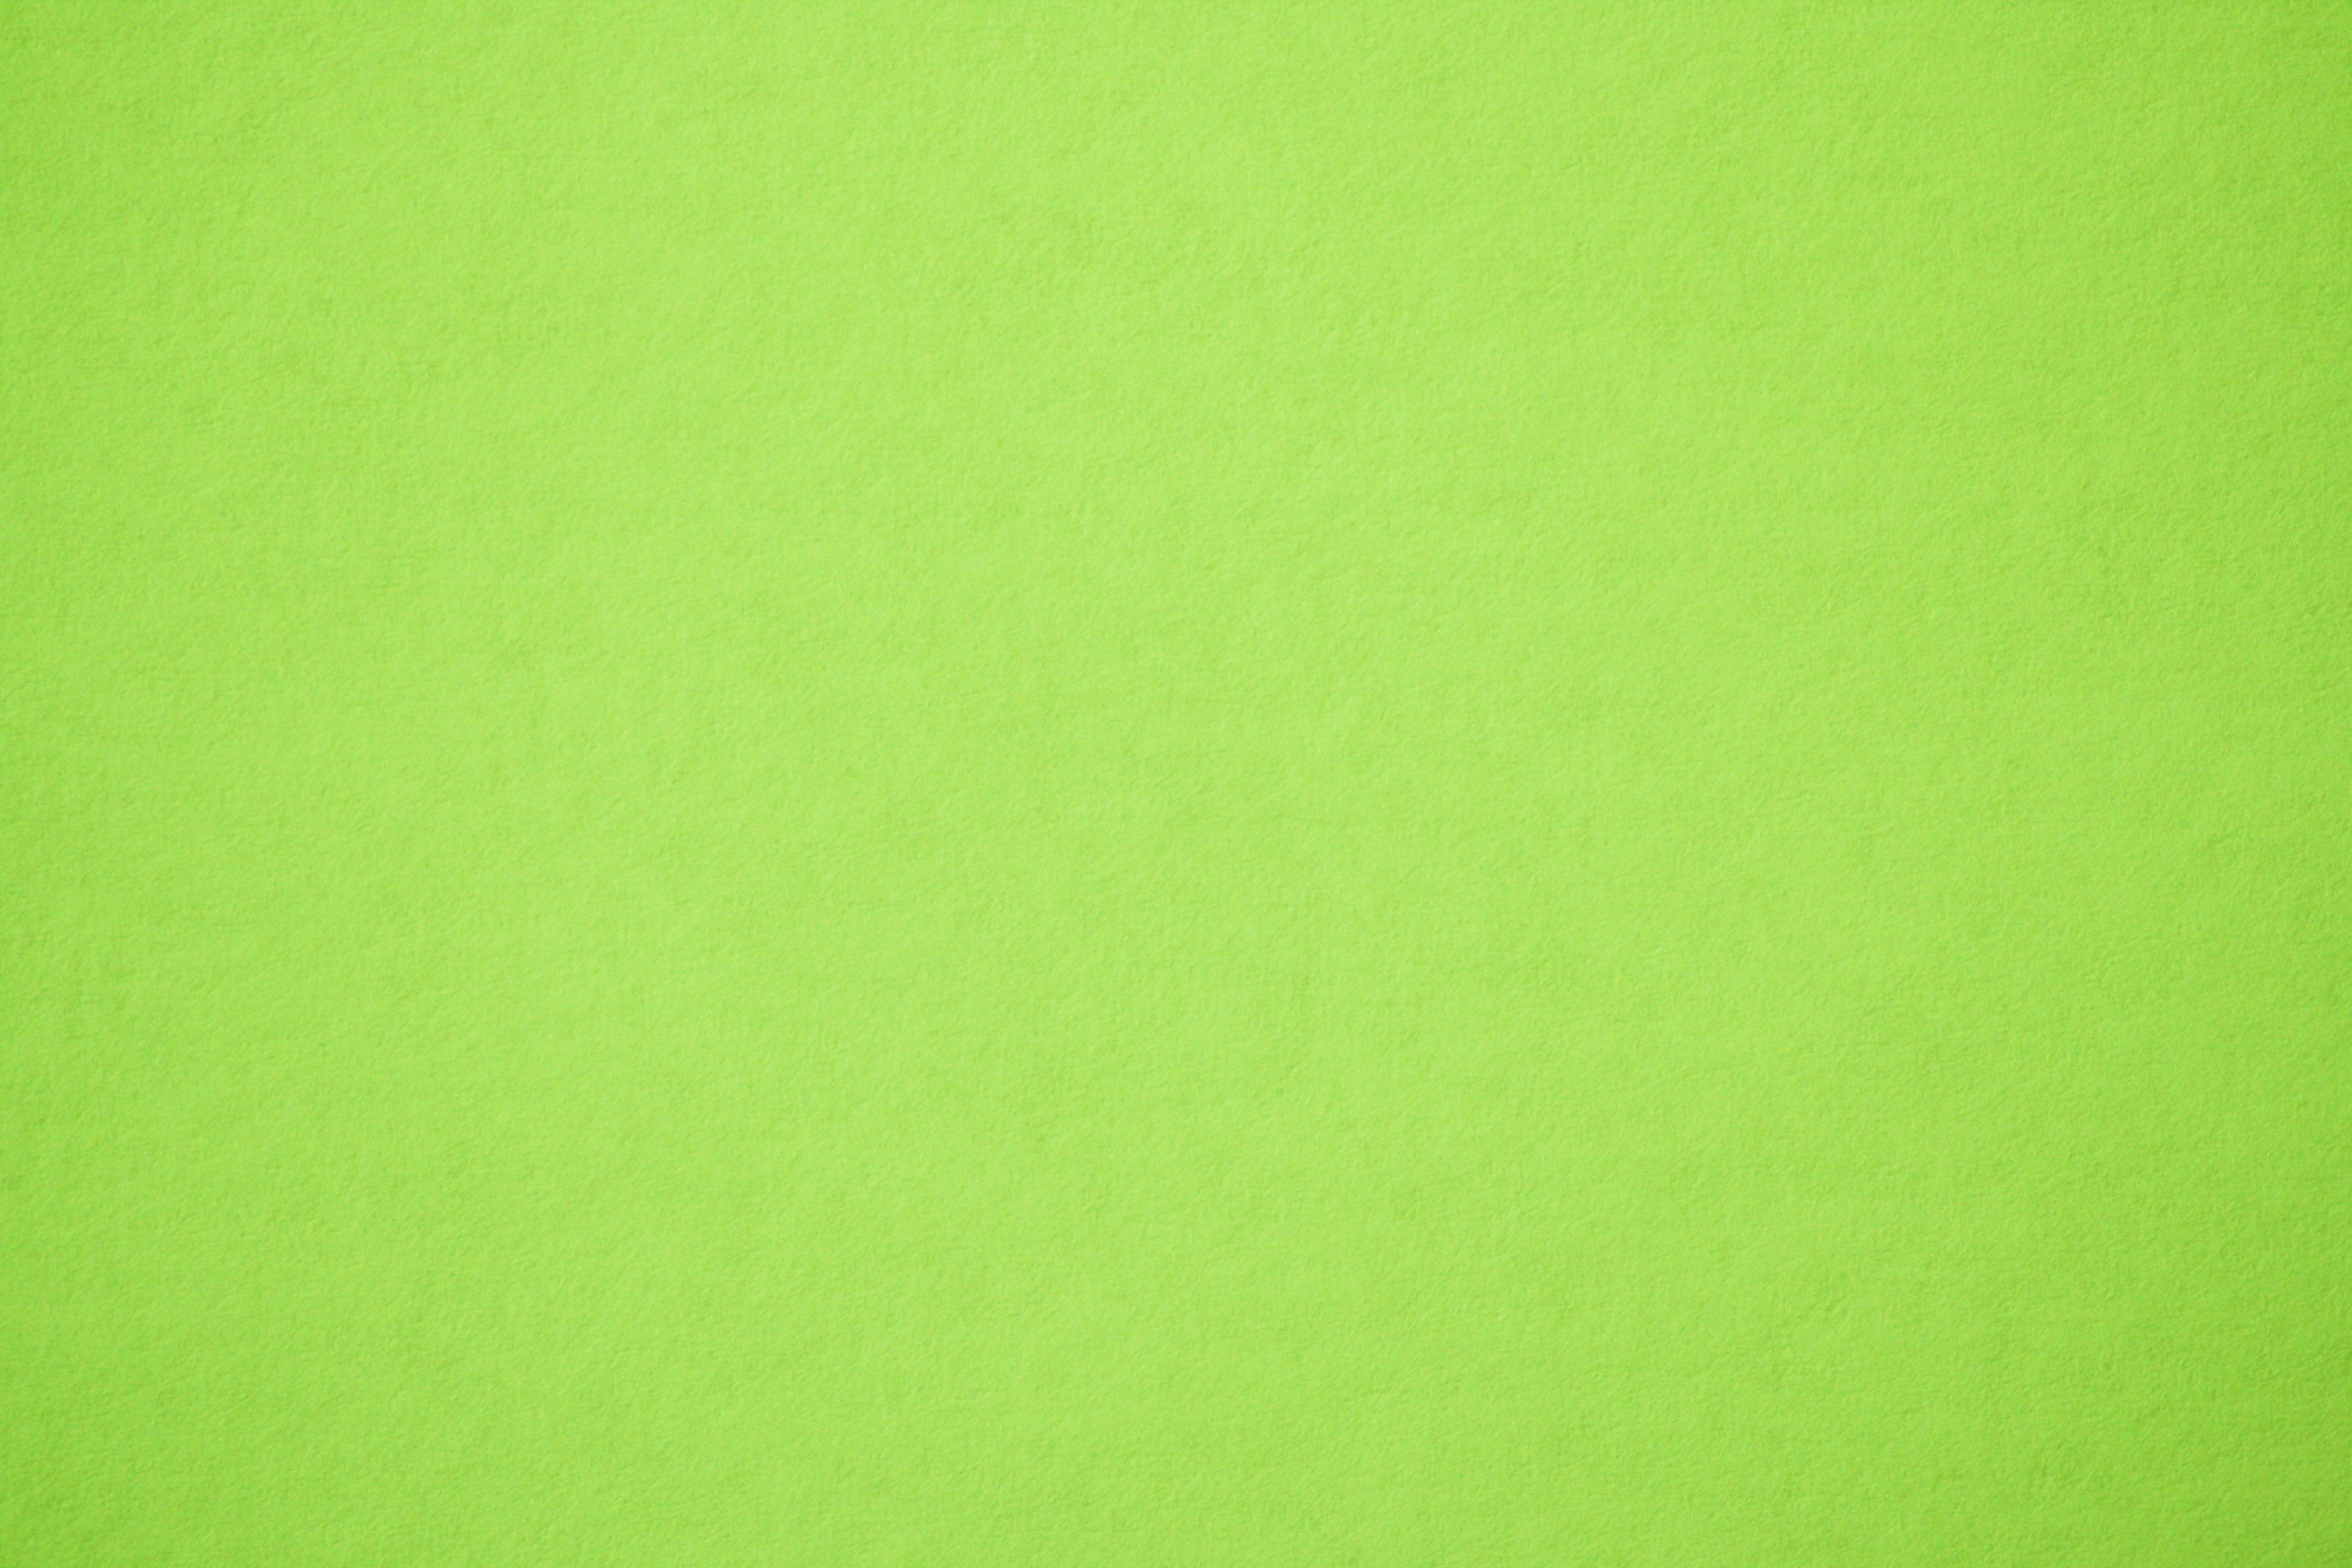 Crumpled Green Paper Texture Picture, Free Photograph